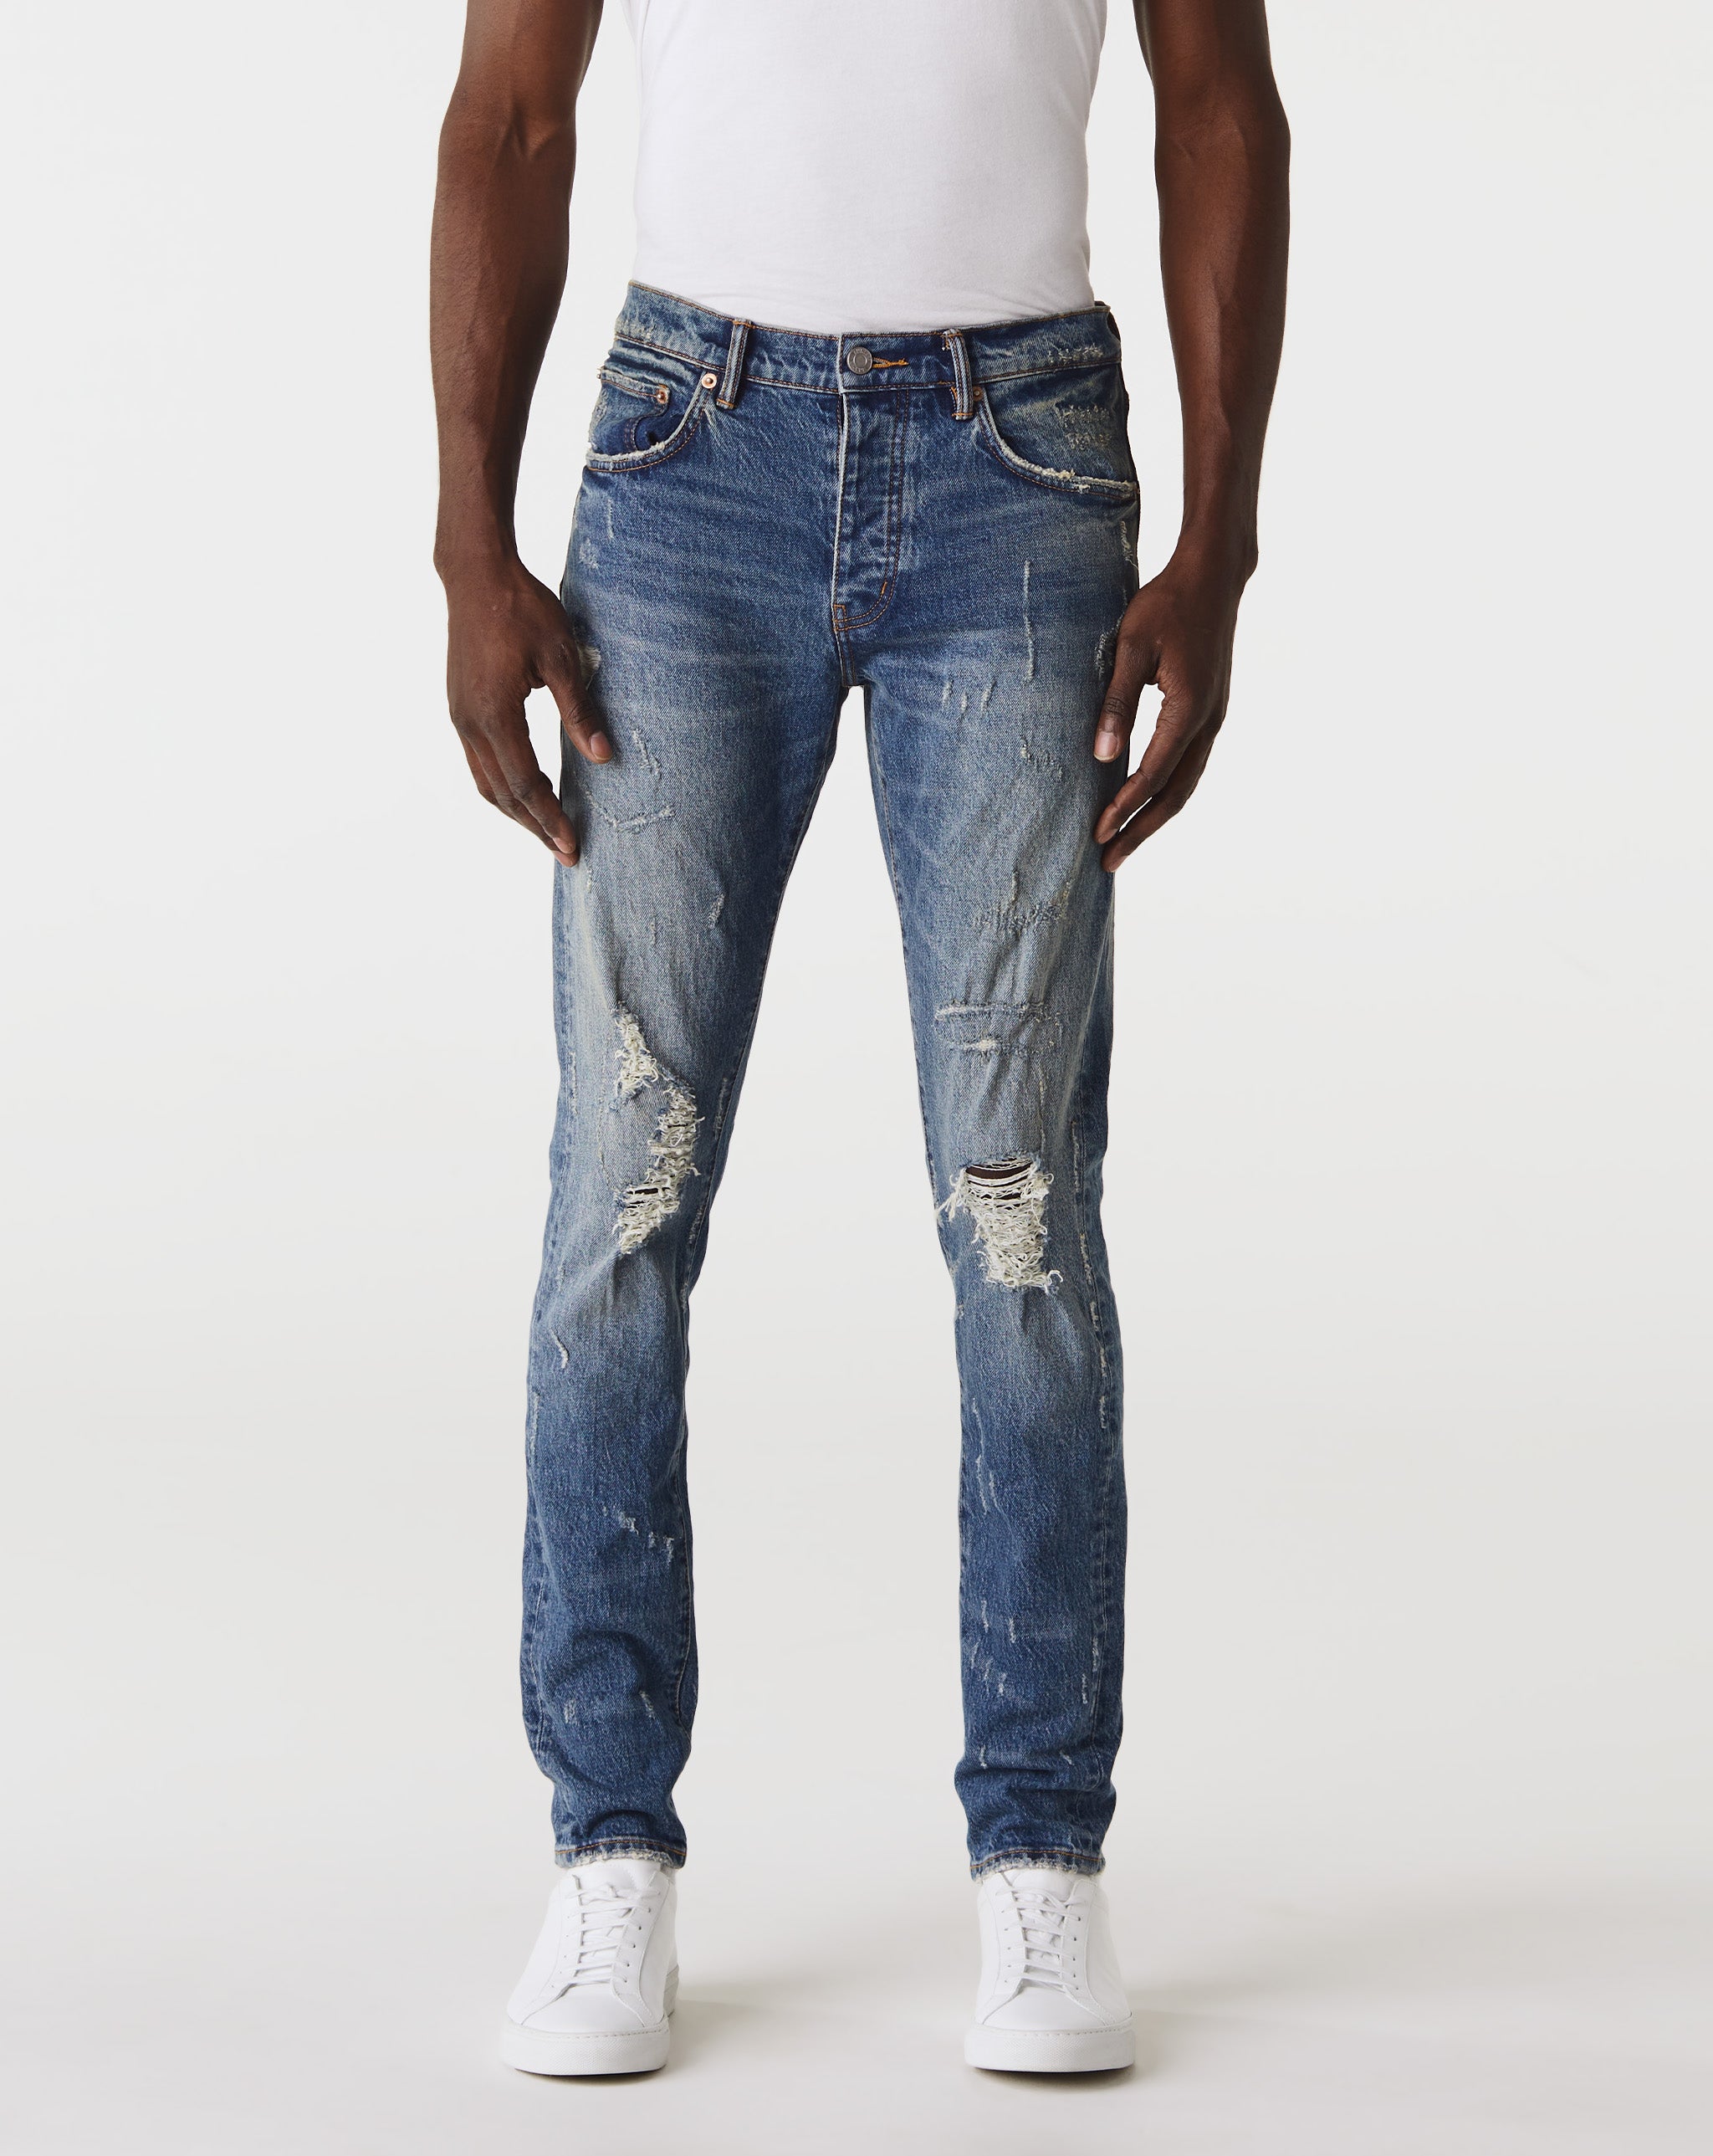 Purple Brand Chitch Onyx Scratch Jeans are a mid-rise waist and a slim-fit leg  - Cheap Erlebniswelt-fliegenfischen Jordan outlet